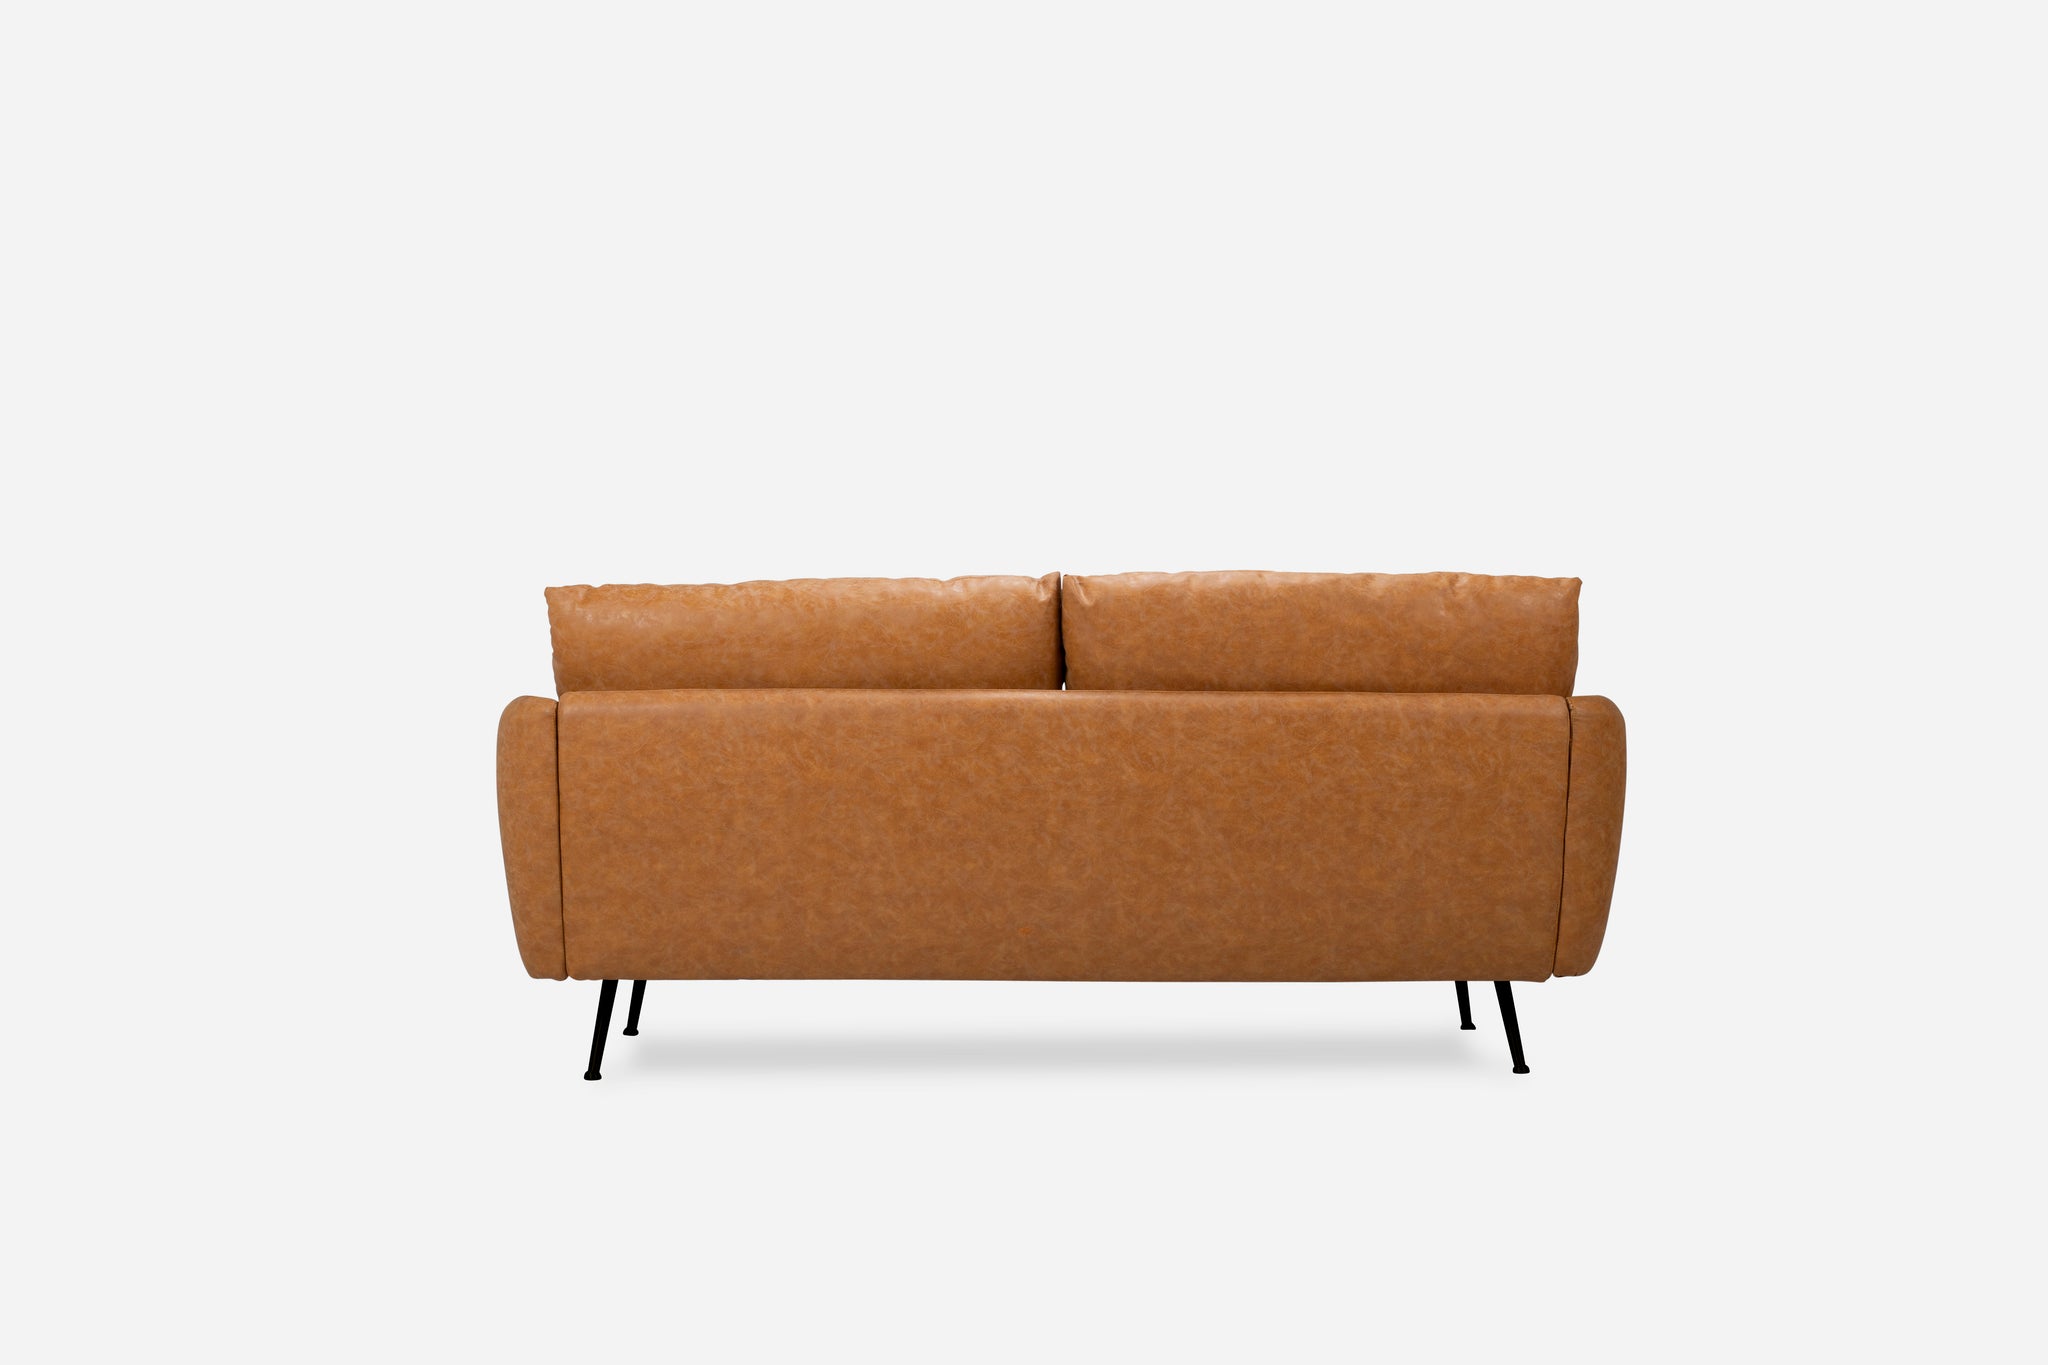 park sofa shown in distressed vegan leather with black legs